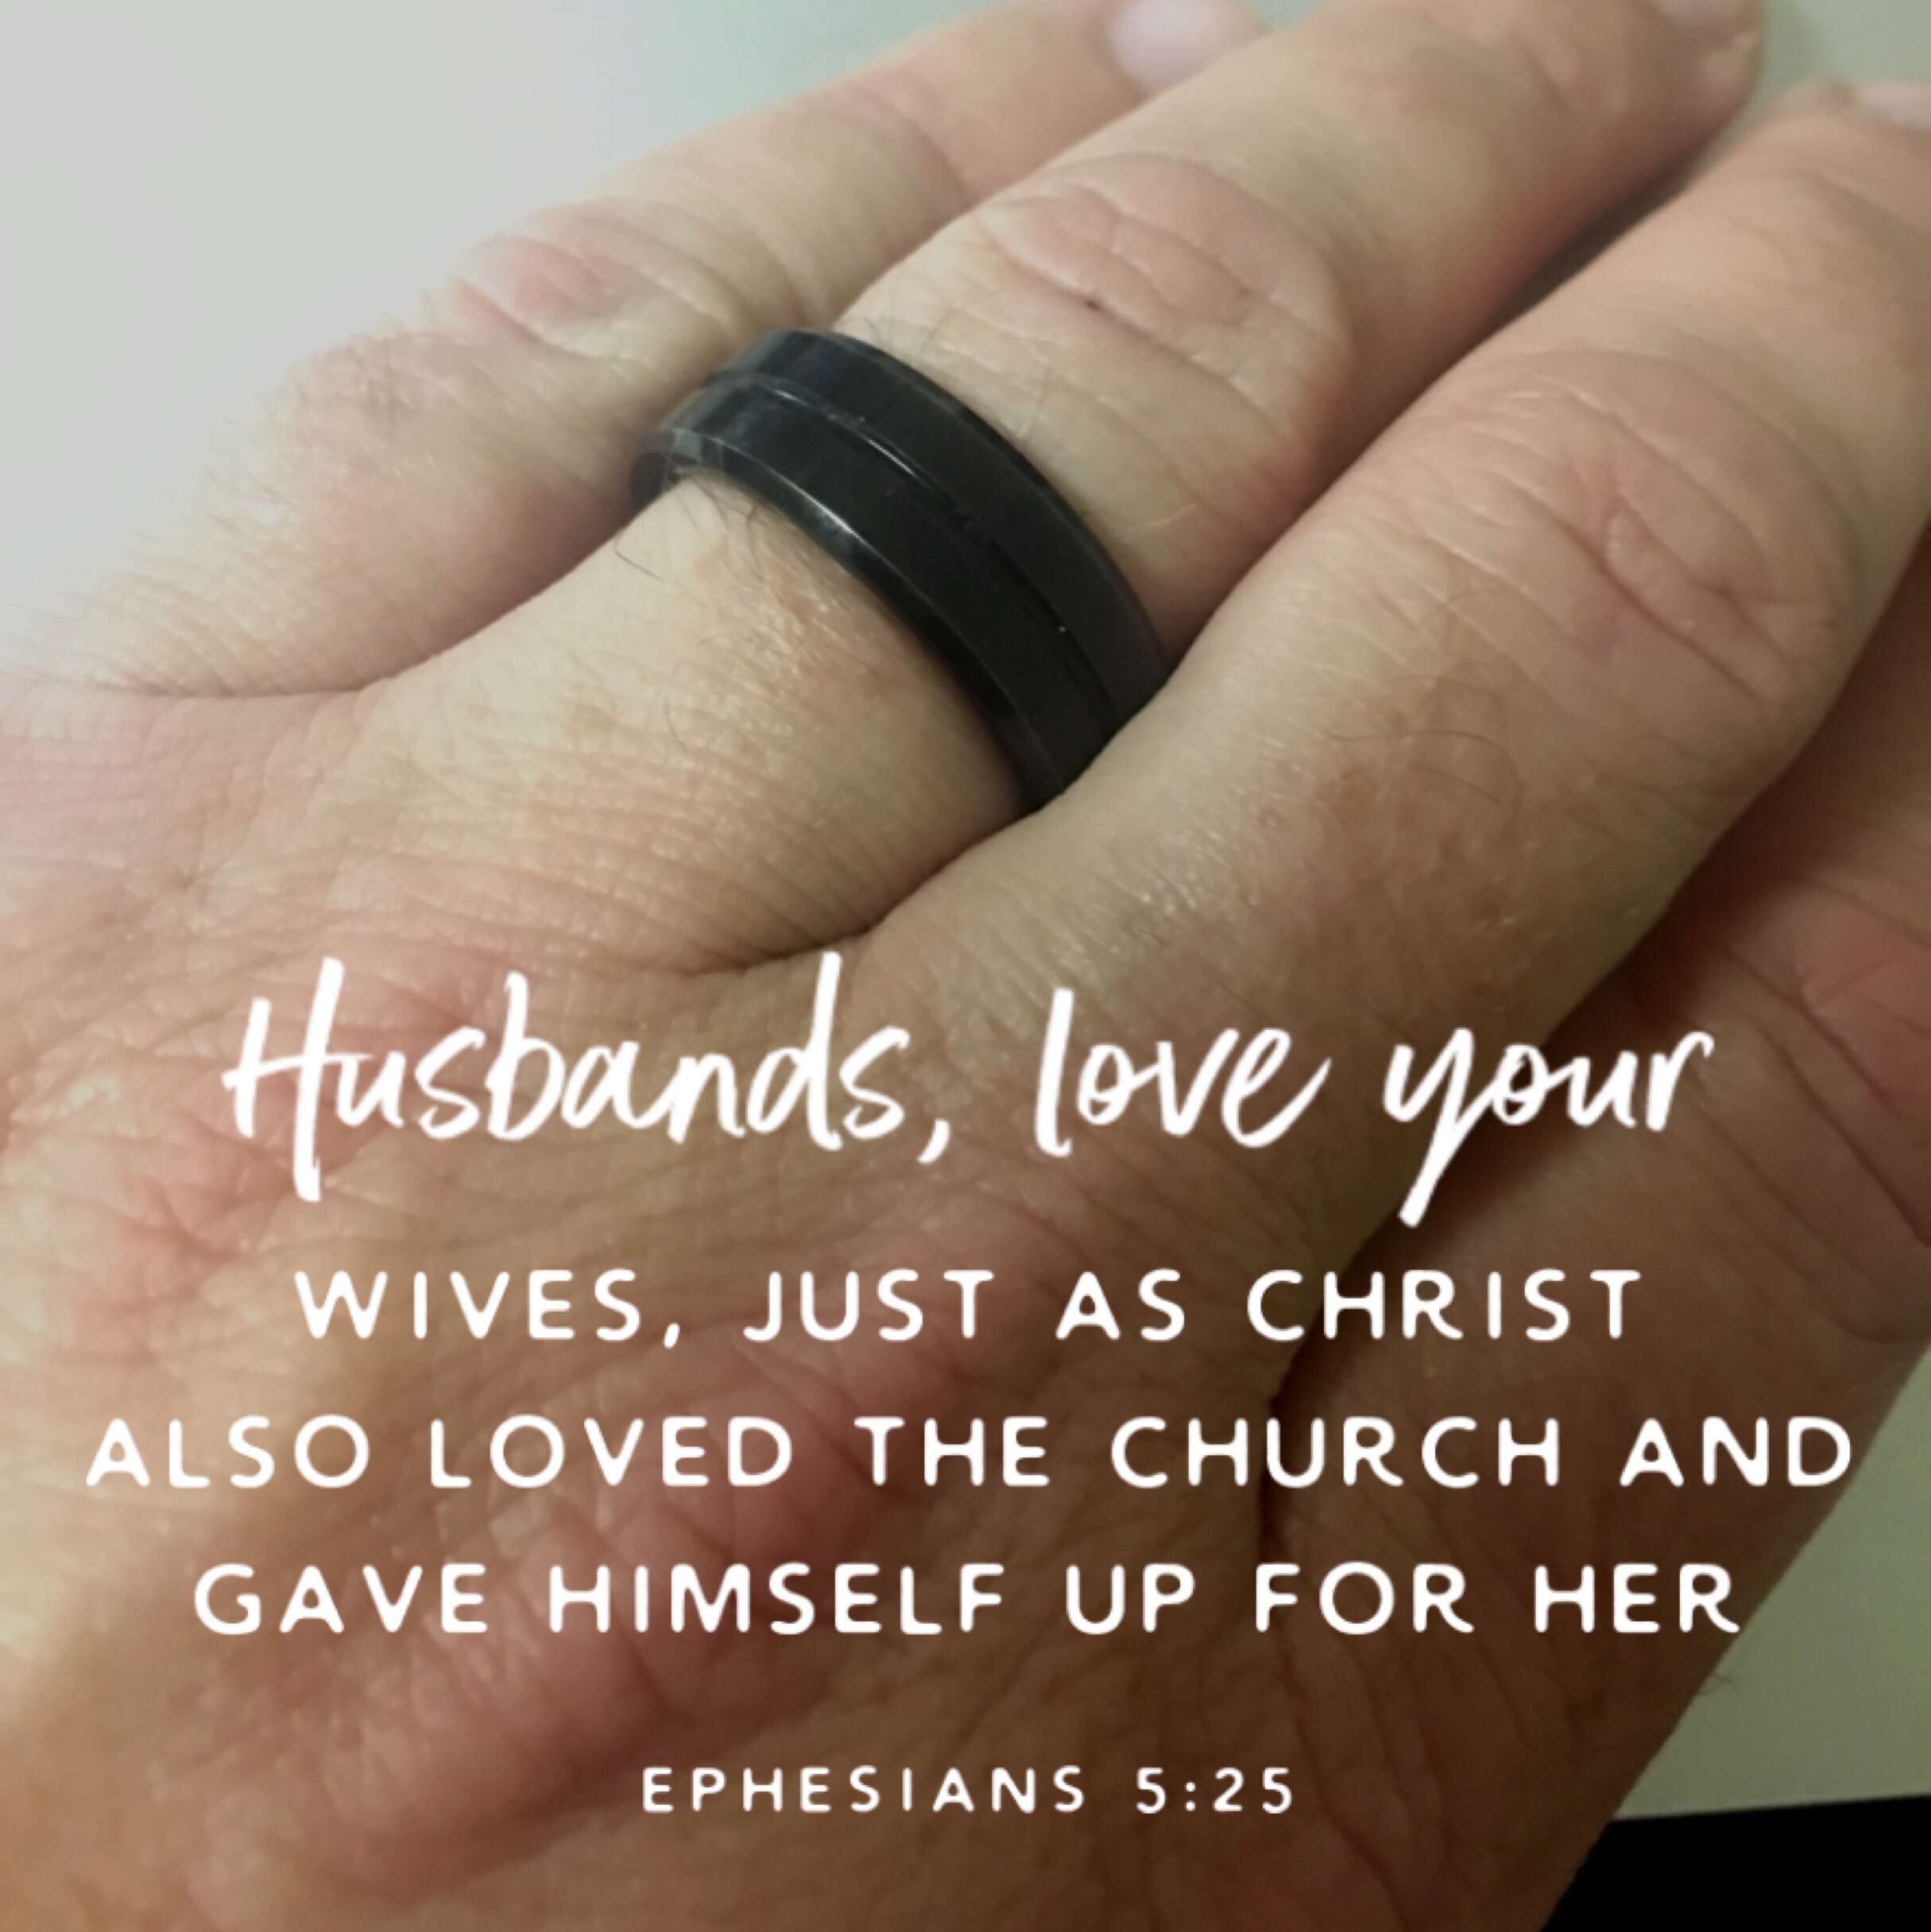 Husbands, love your wives, just as Christ also loved the church and gave Himself up for her, - Ephesians 5:25